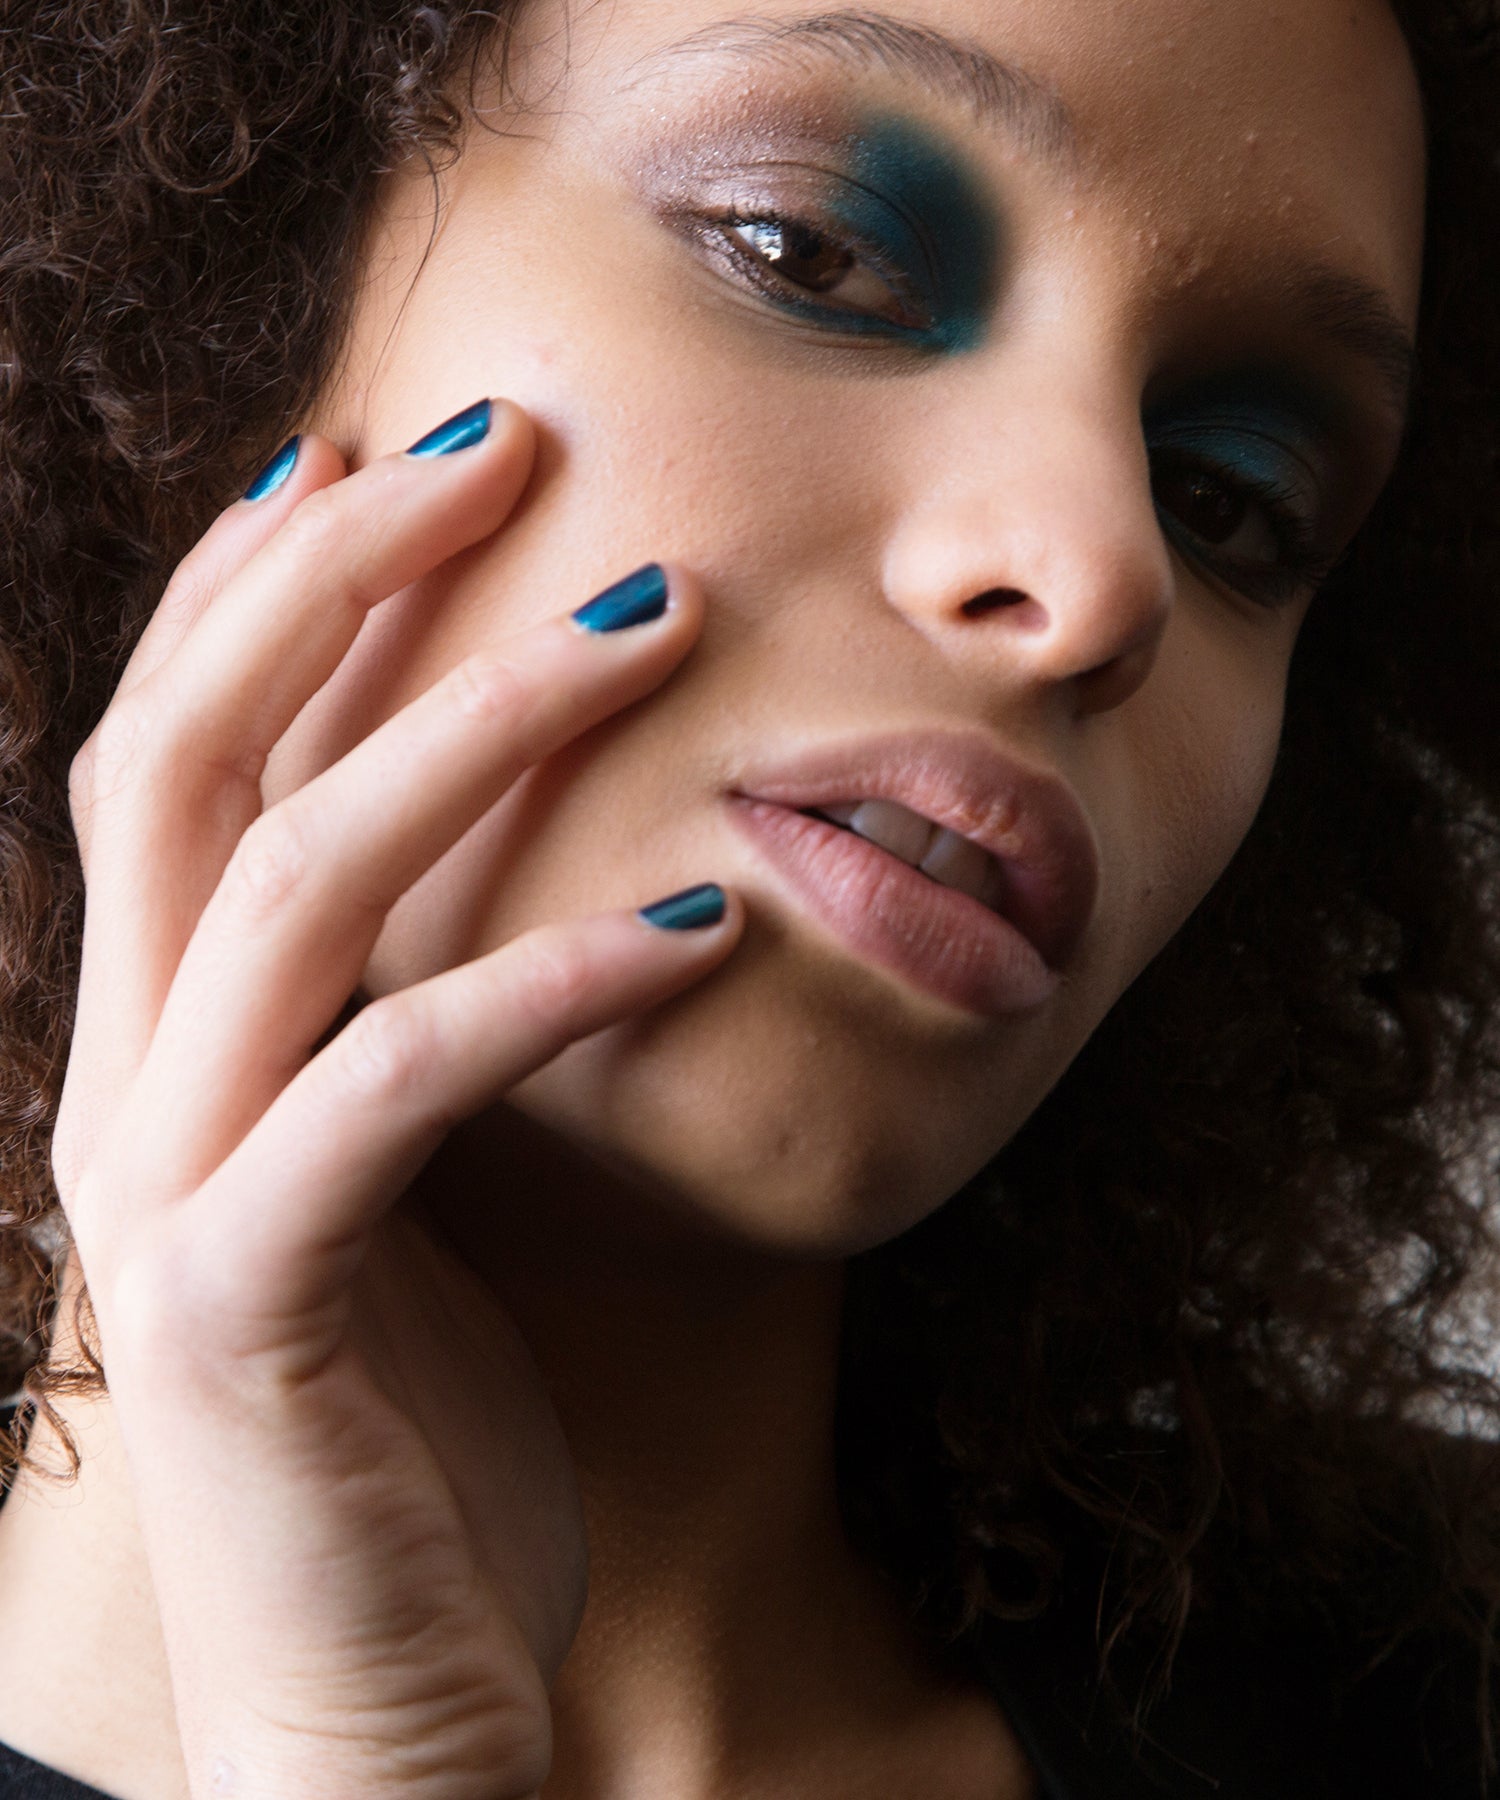 6 Things That Are Unexpectedly Ruining Your Manicure